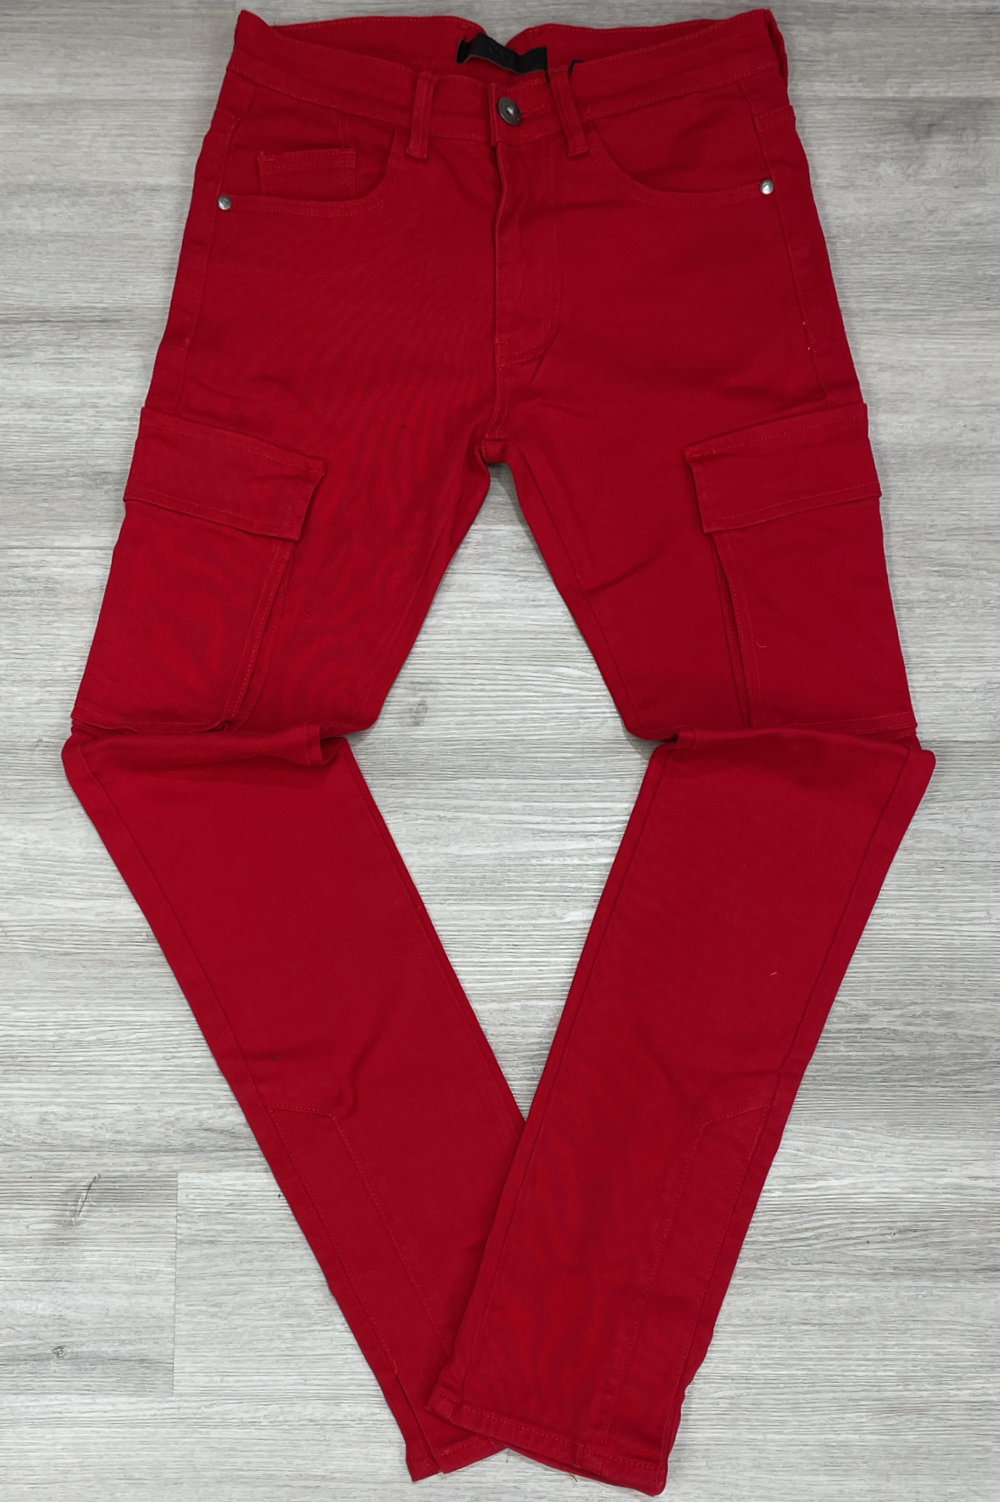 KDNK - stacked cargo pants (red)